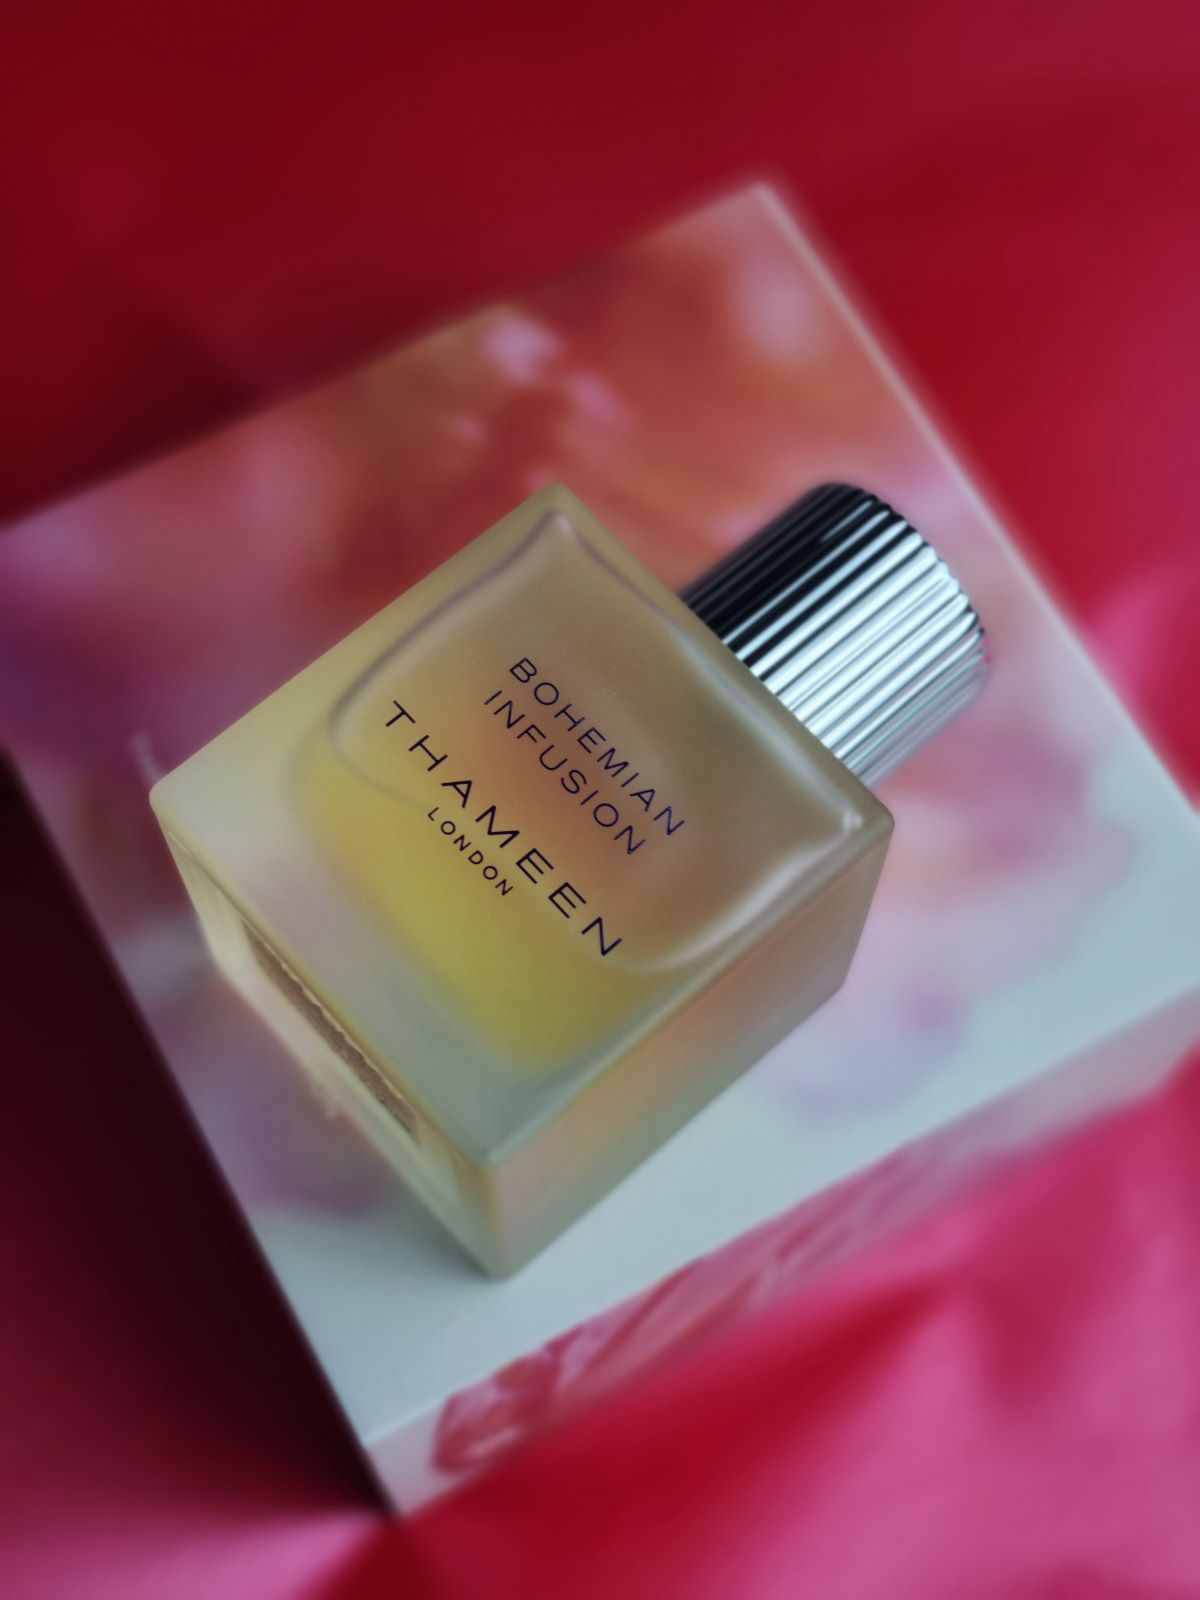 Bohemian Infusion – Thameen Fragrance